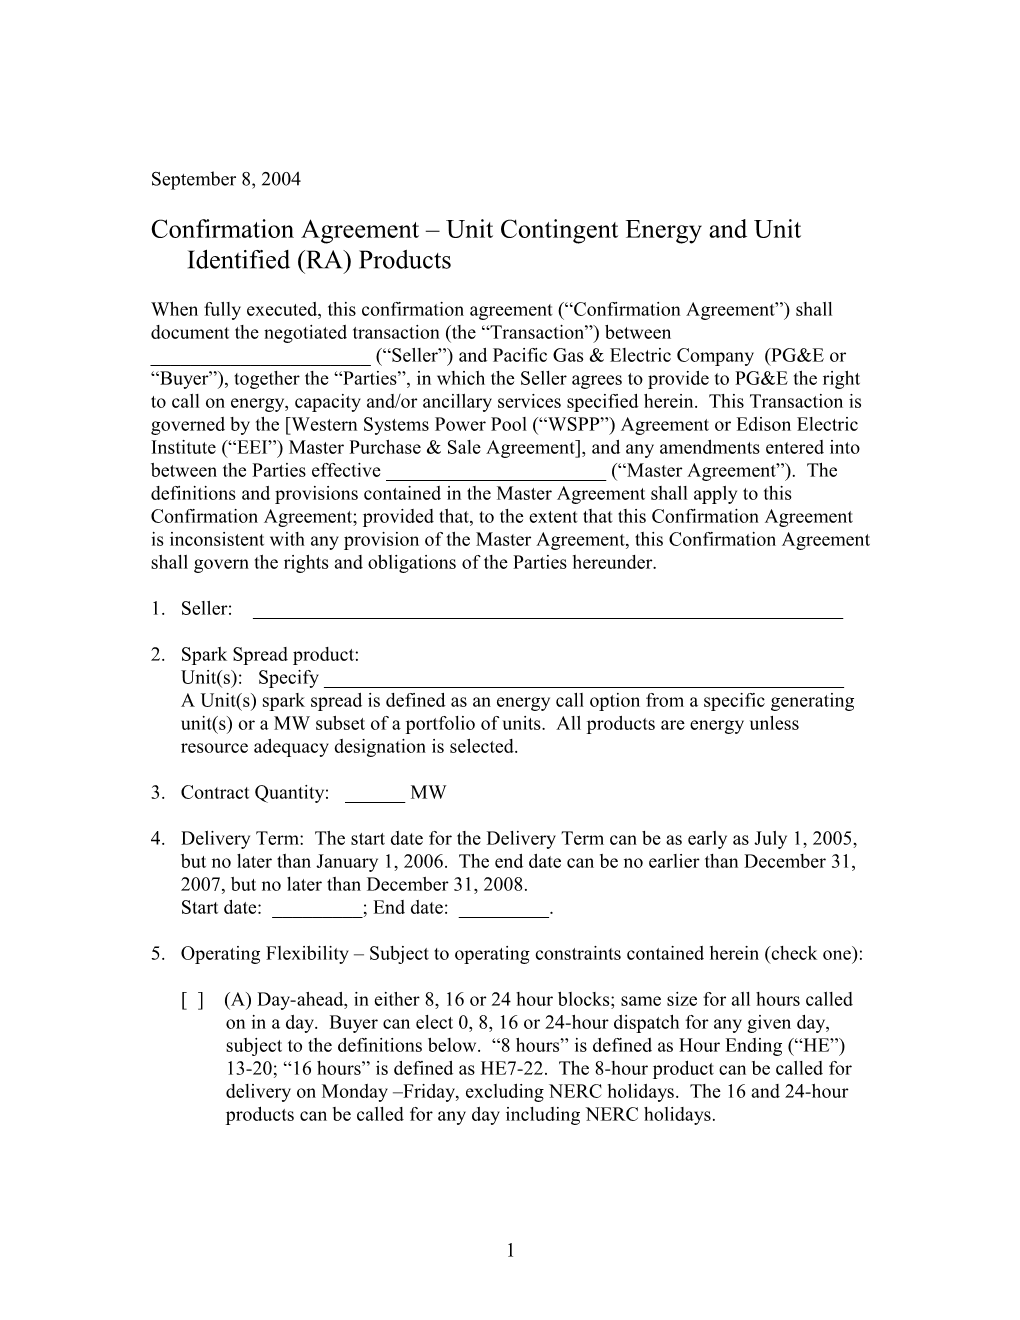 Confirmation Agreement Unit Contingent Energy and Unit Identified (RA) Products